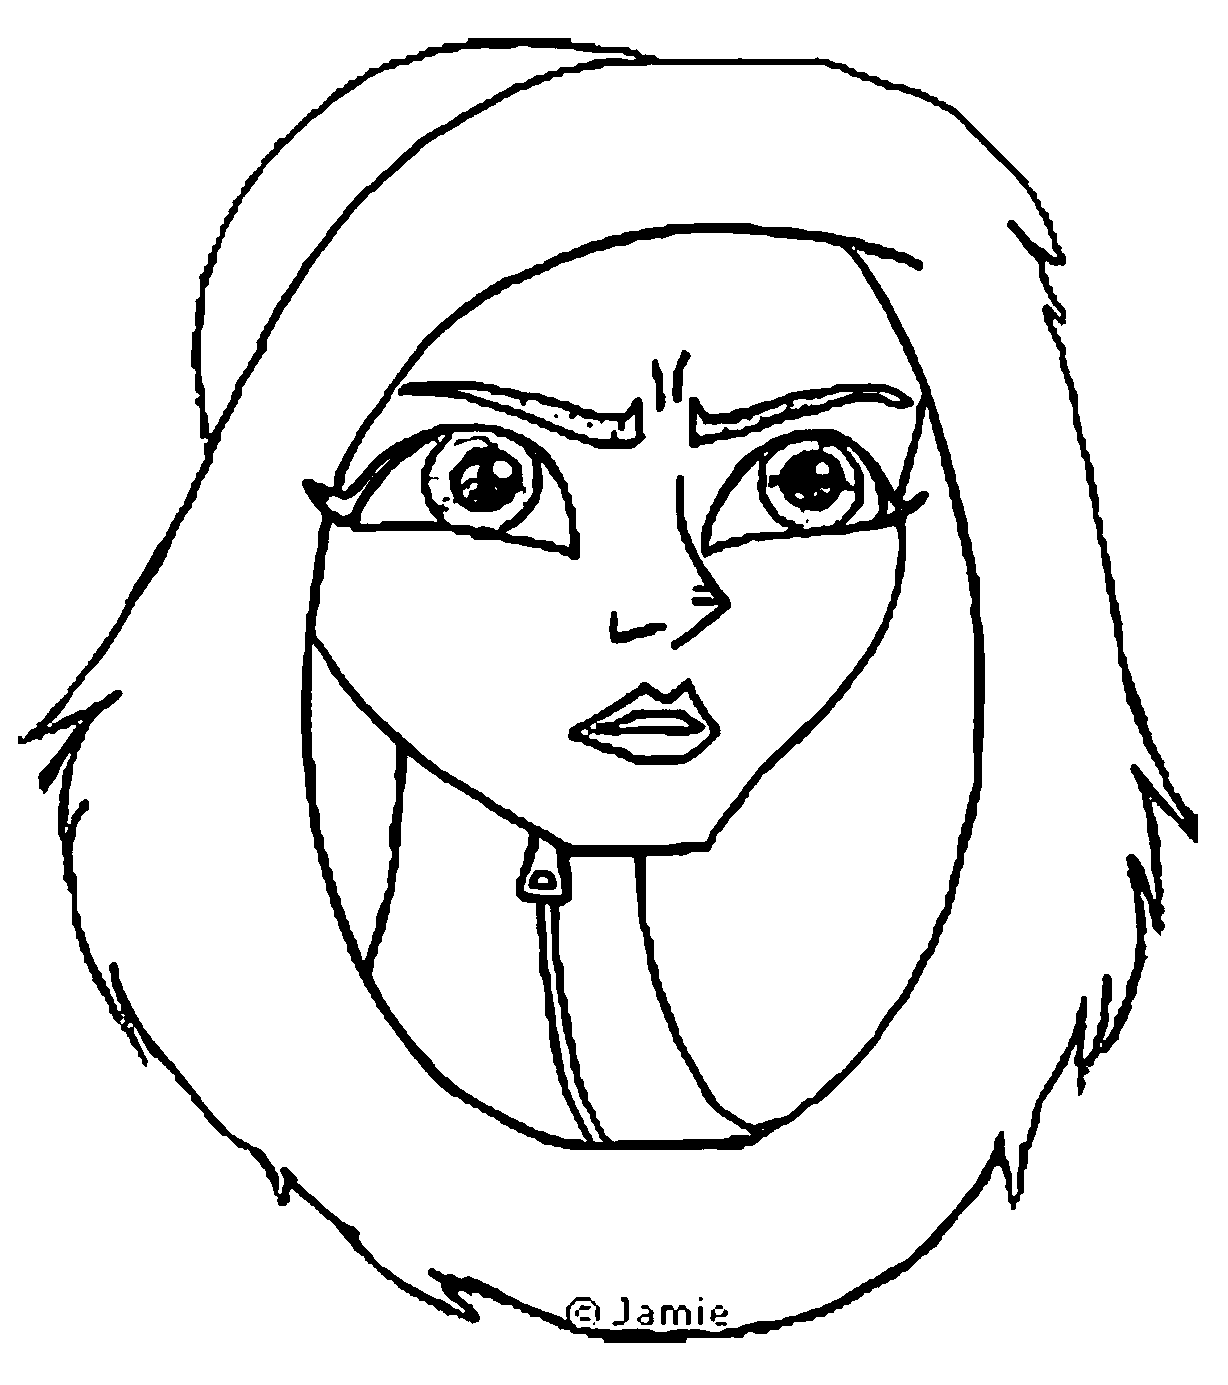 Star Wars Padme Clone Face Coloring Page | Wecoloringpage